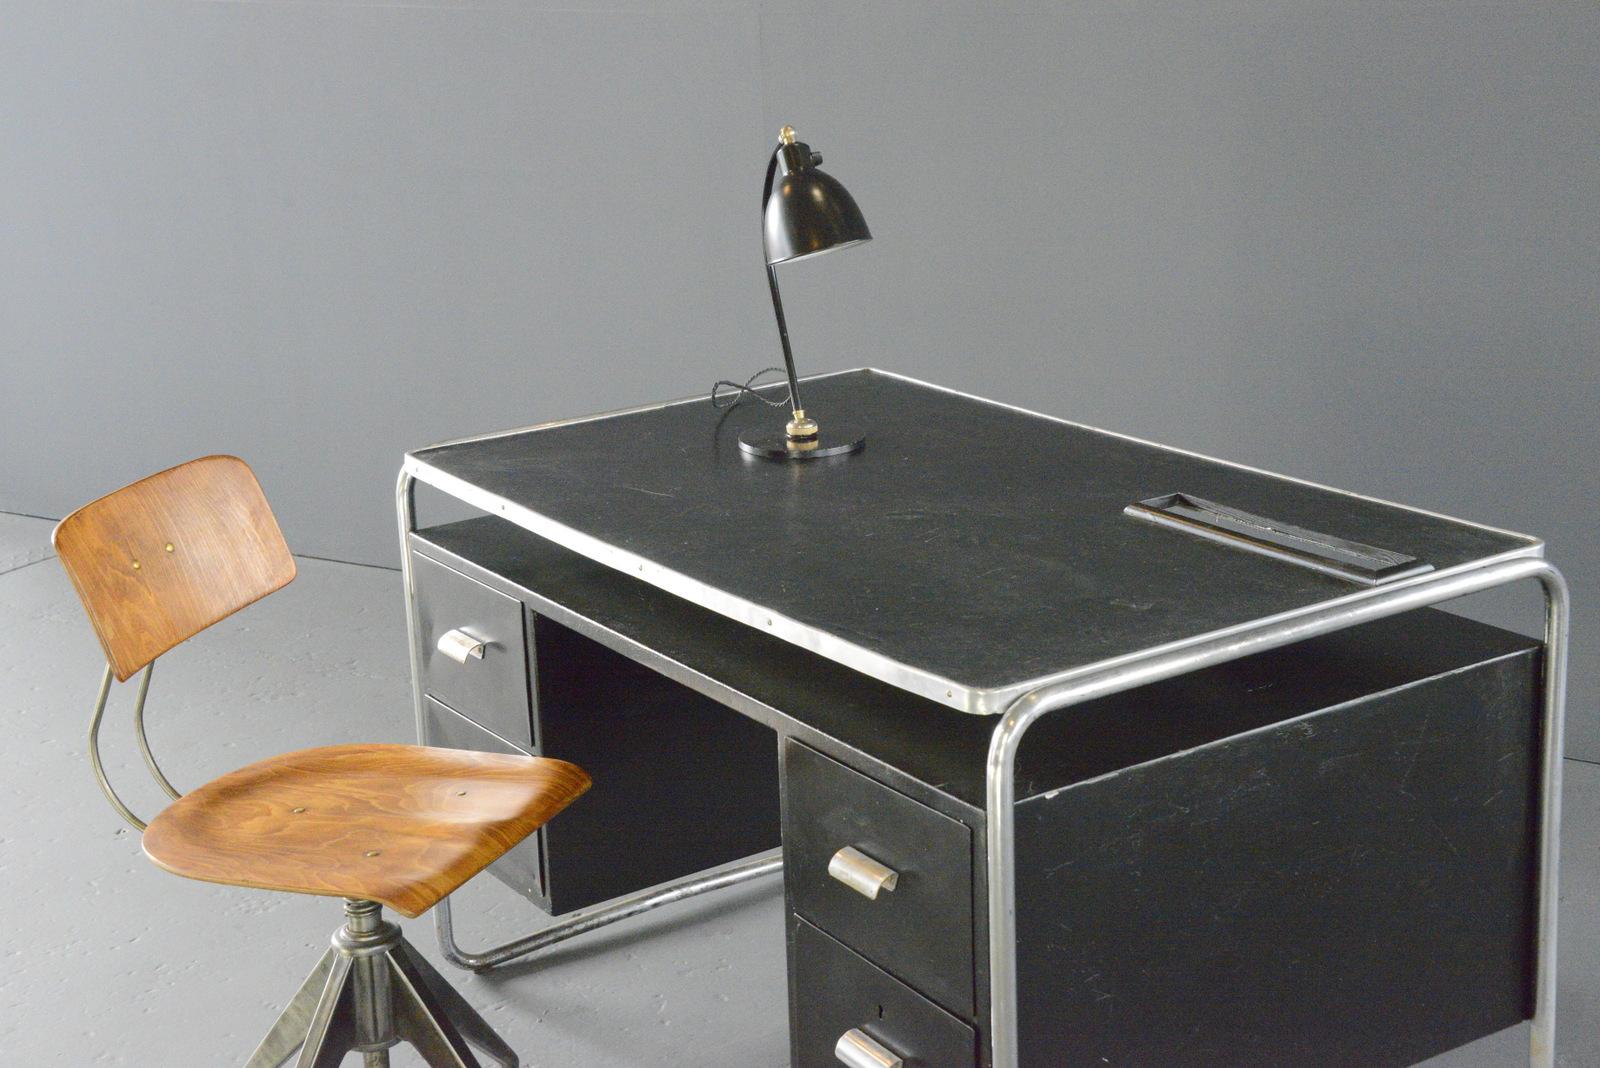 Tubular Steel Bauhaus Desk By Mauser Circa 1930s

- Chromed tubular steel frame
- Nickel plated brass handles
- 4 drawers
- Black linoleum top
- Storage in the front of the desk for files, books etc
- Made by Mauser Werke
- Salvaged from the